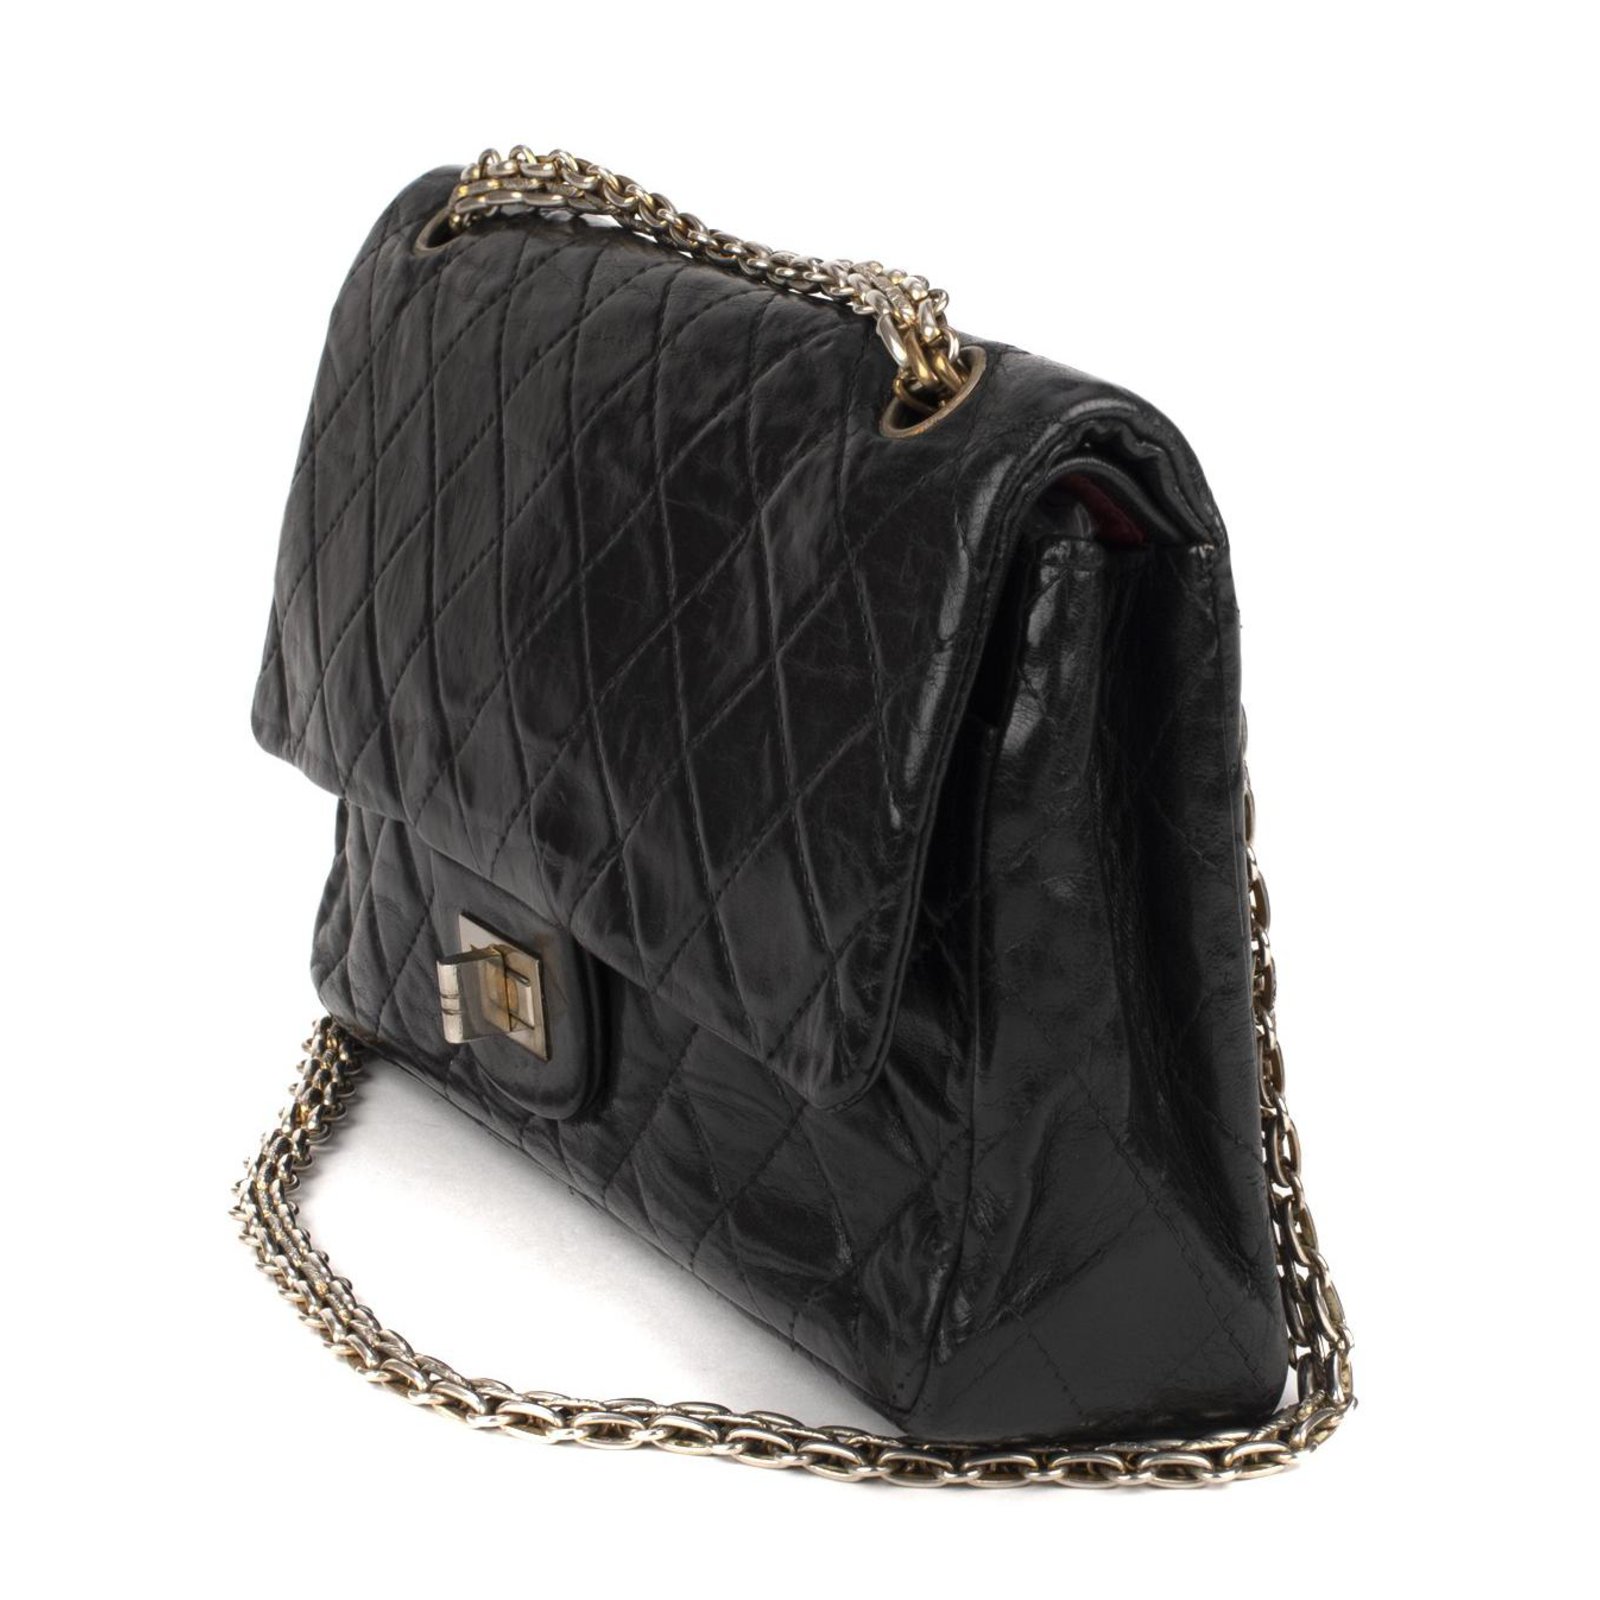 Chanel bag 2.55 vintage black quilted leather in good condition